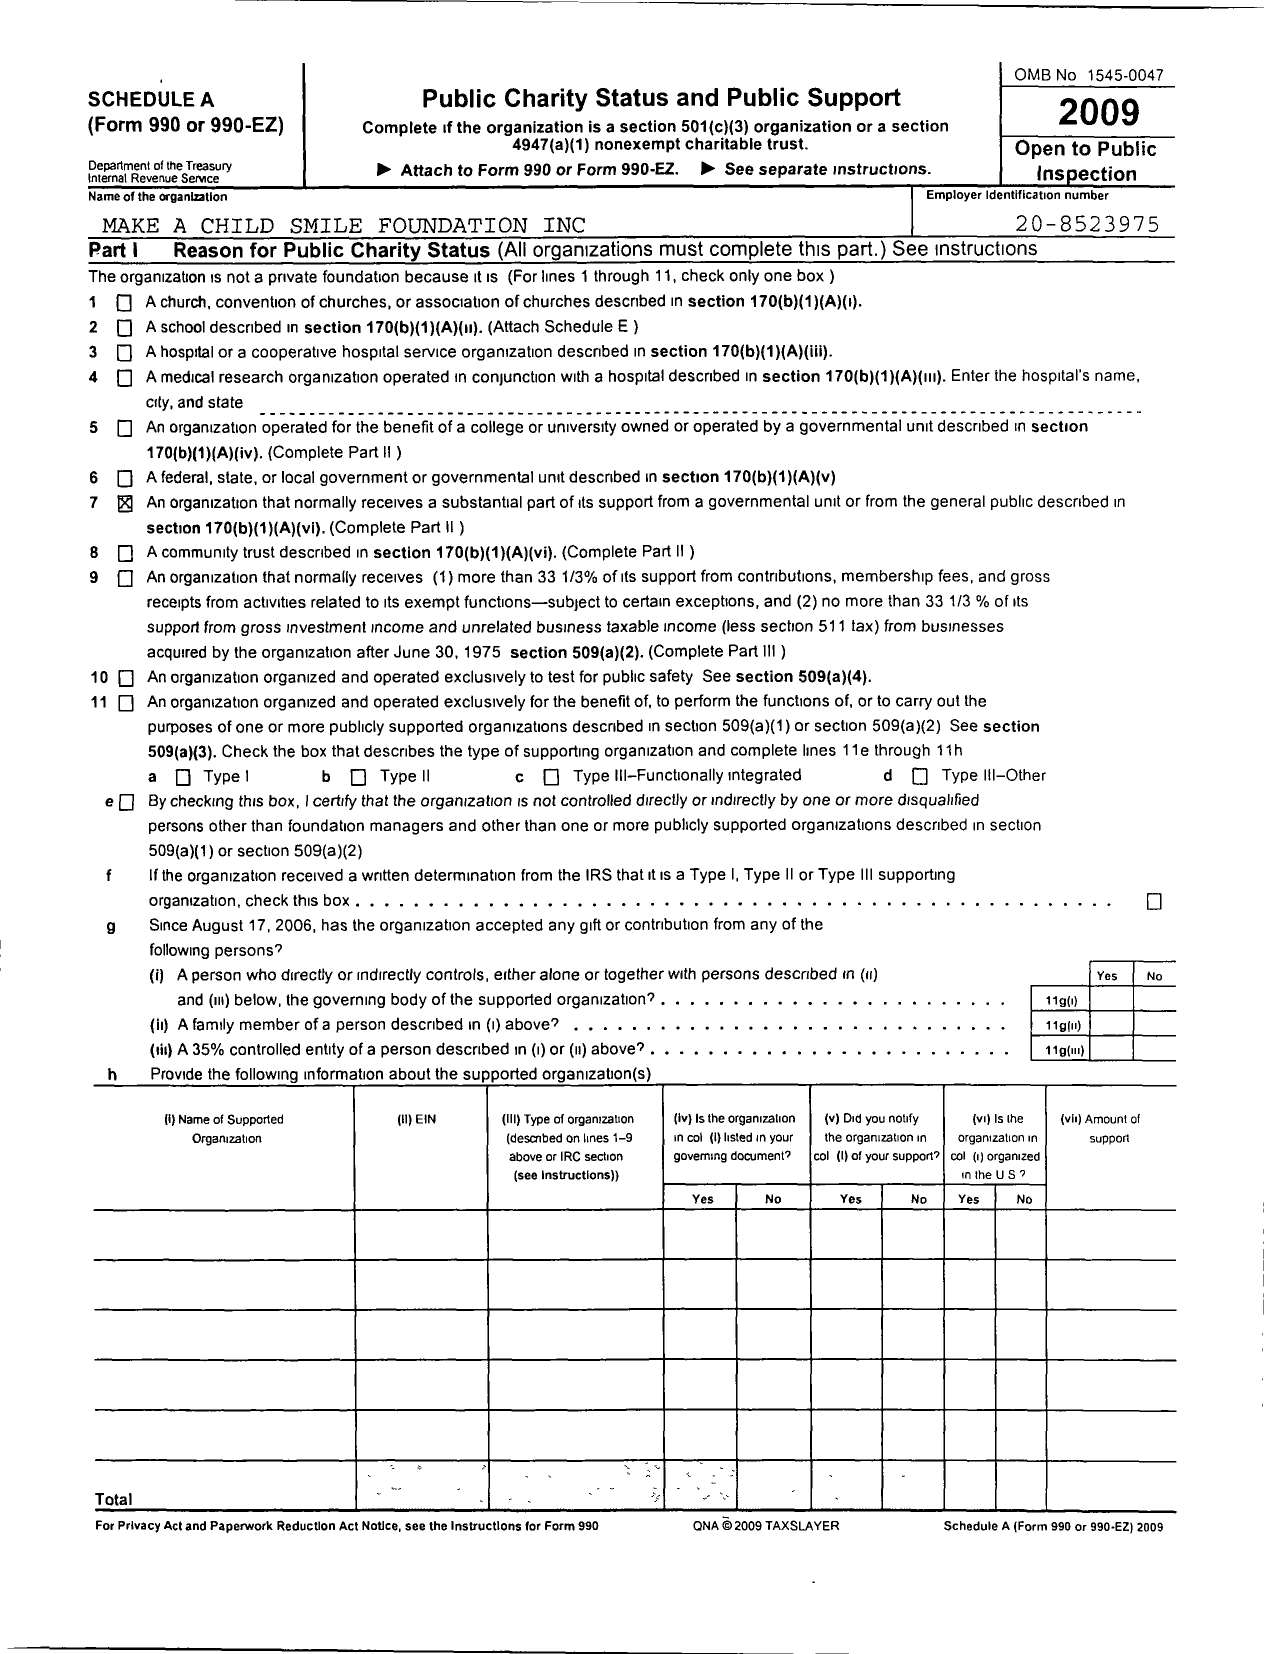 Image of first page of 2009 Form 990R for Make A Child Smile Foundation